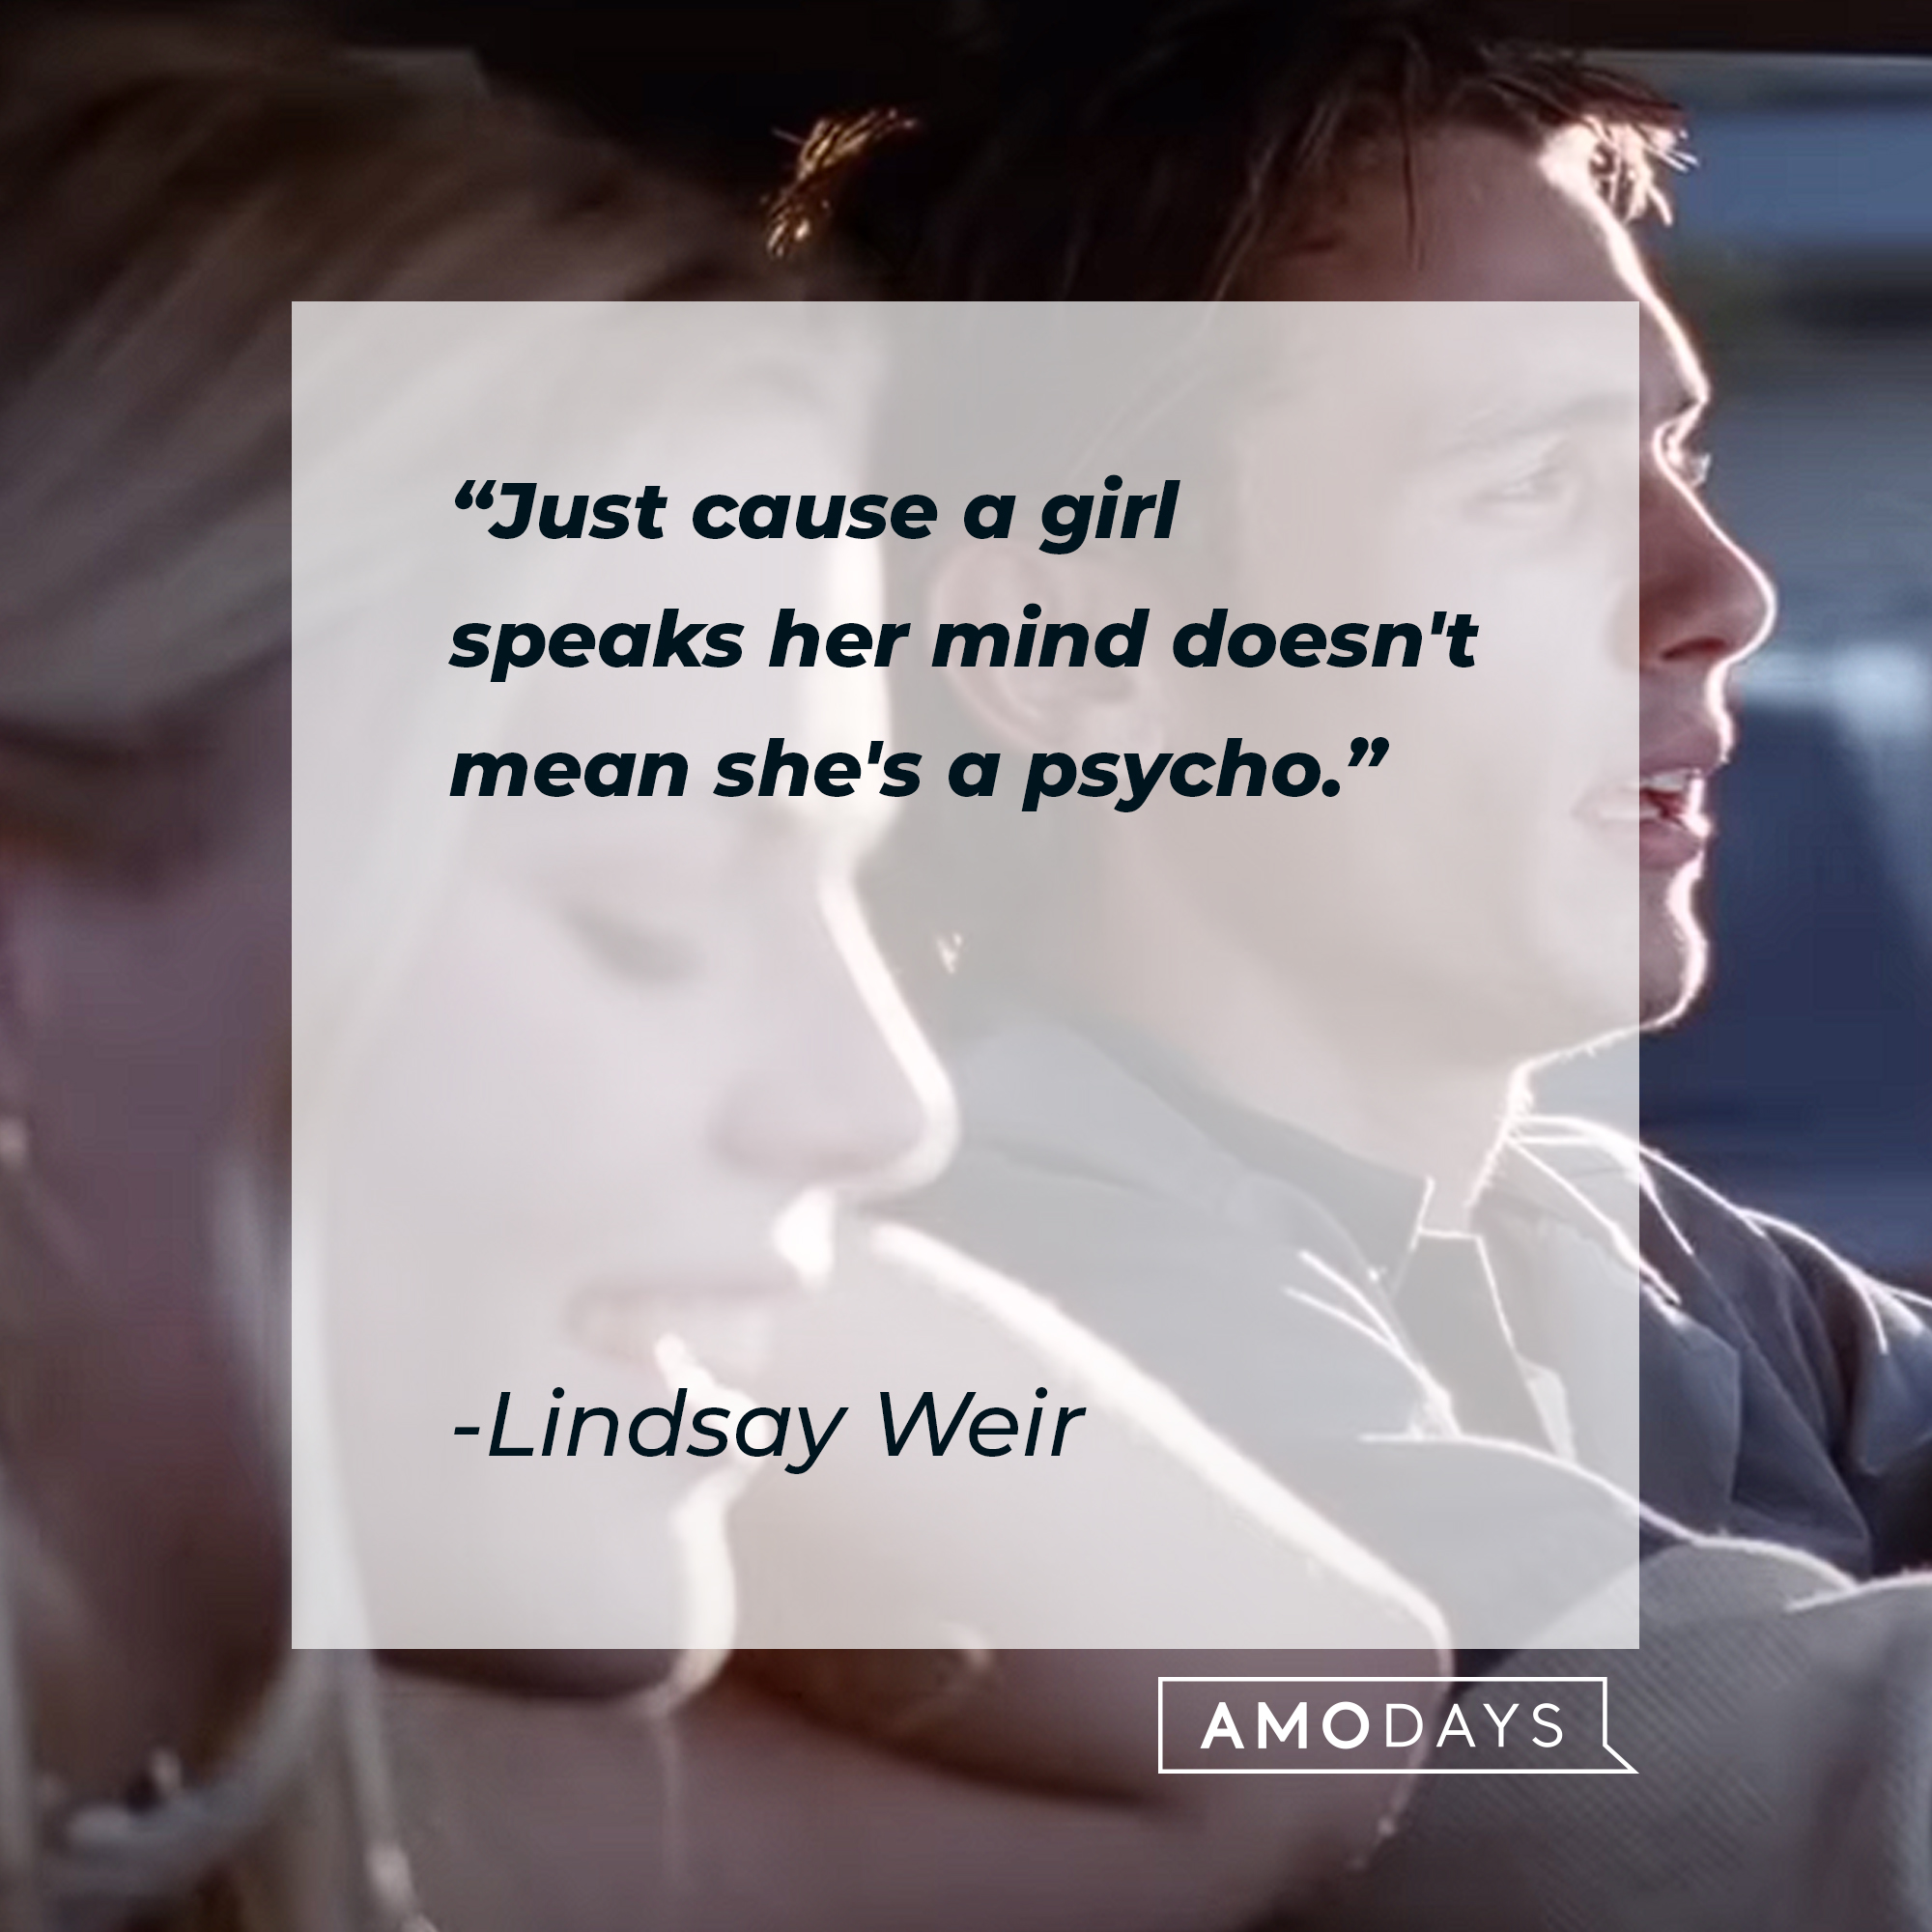 Lindsay Weir's quote: "Just cause a girl speaks her mind doesn't mean she's a psycho." | Source: Youtube.com/paramountmovies